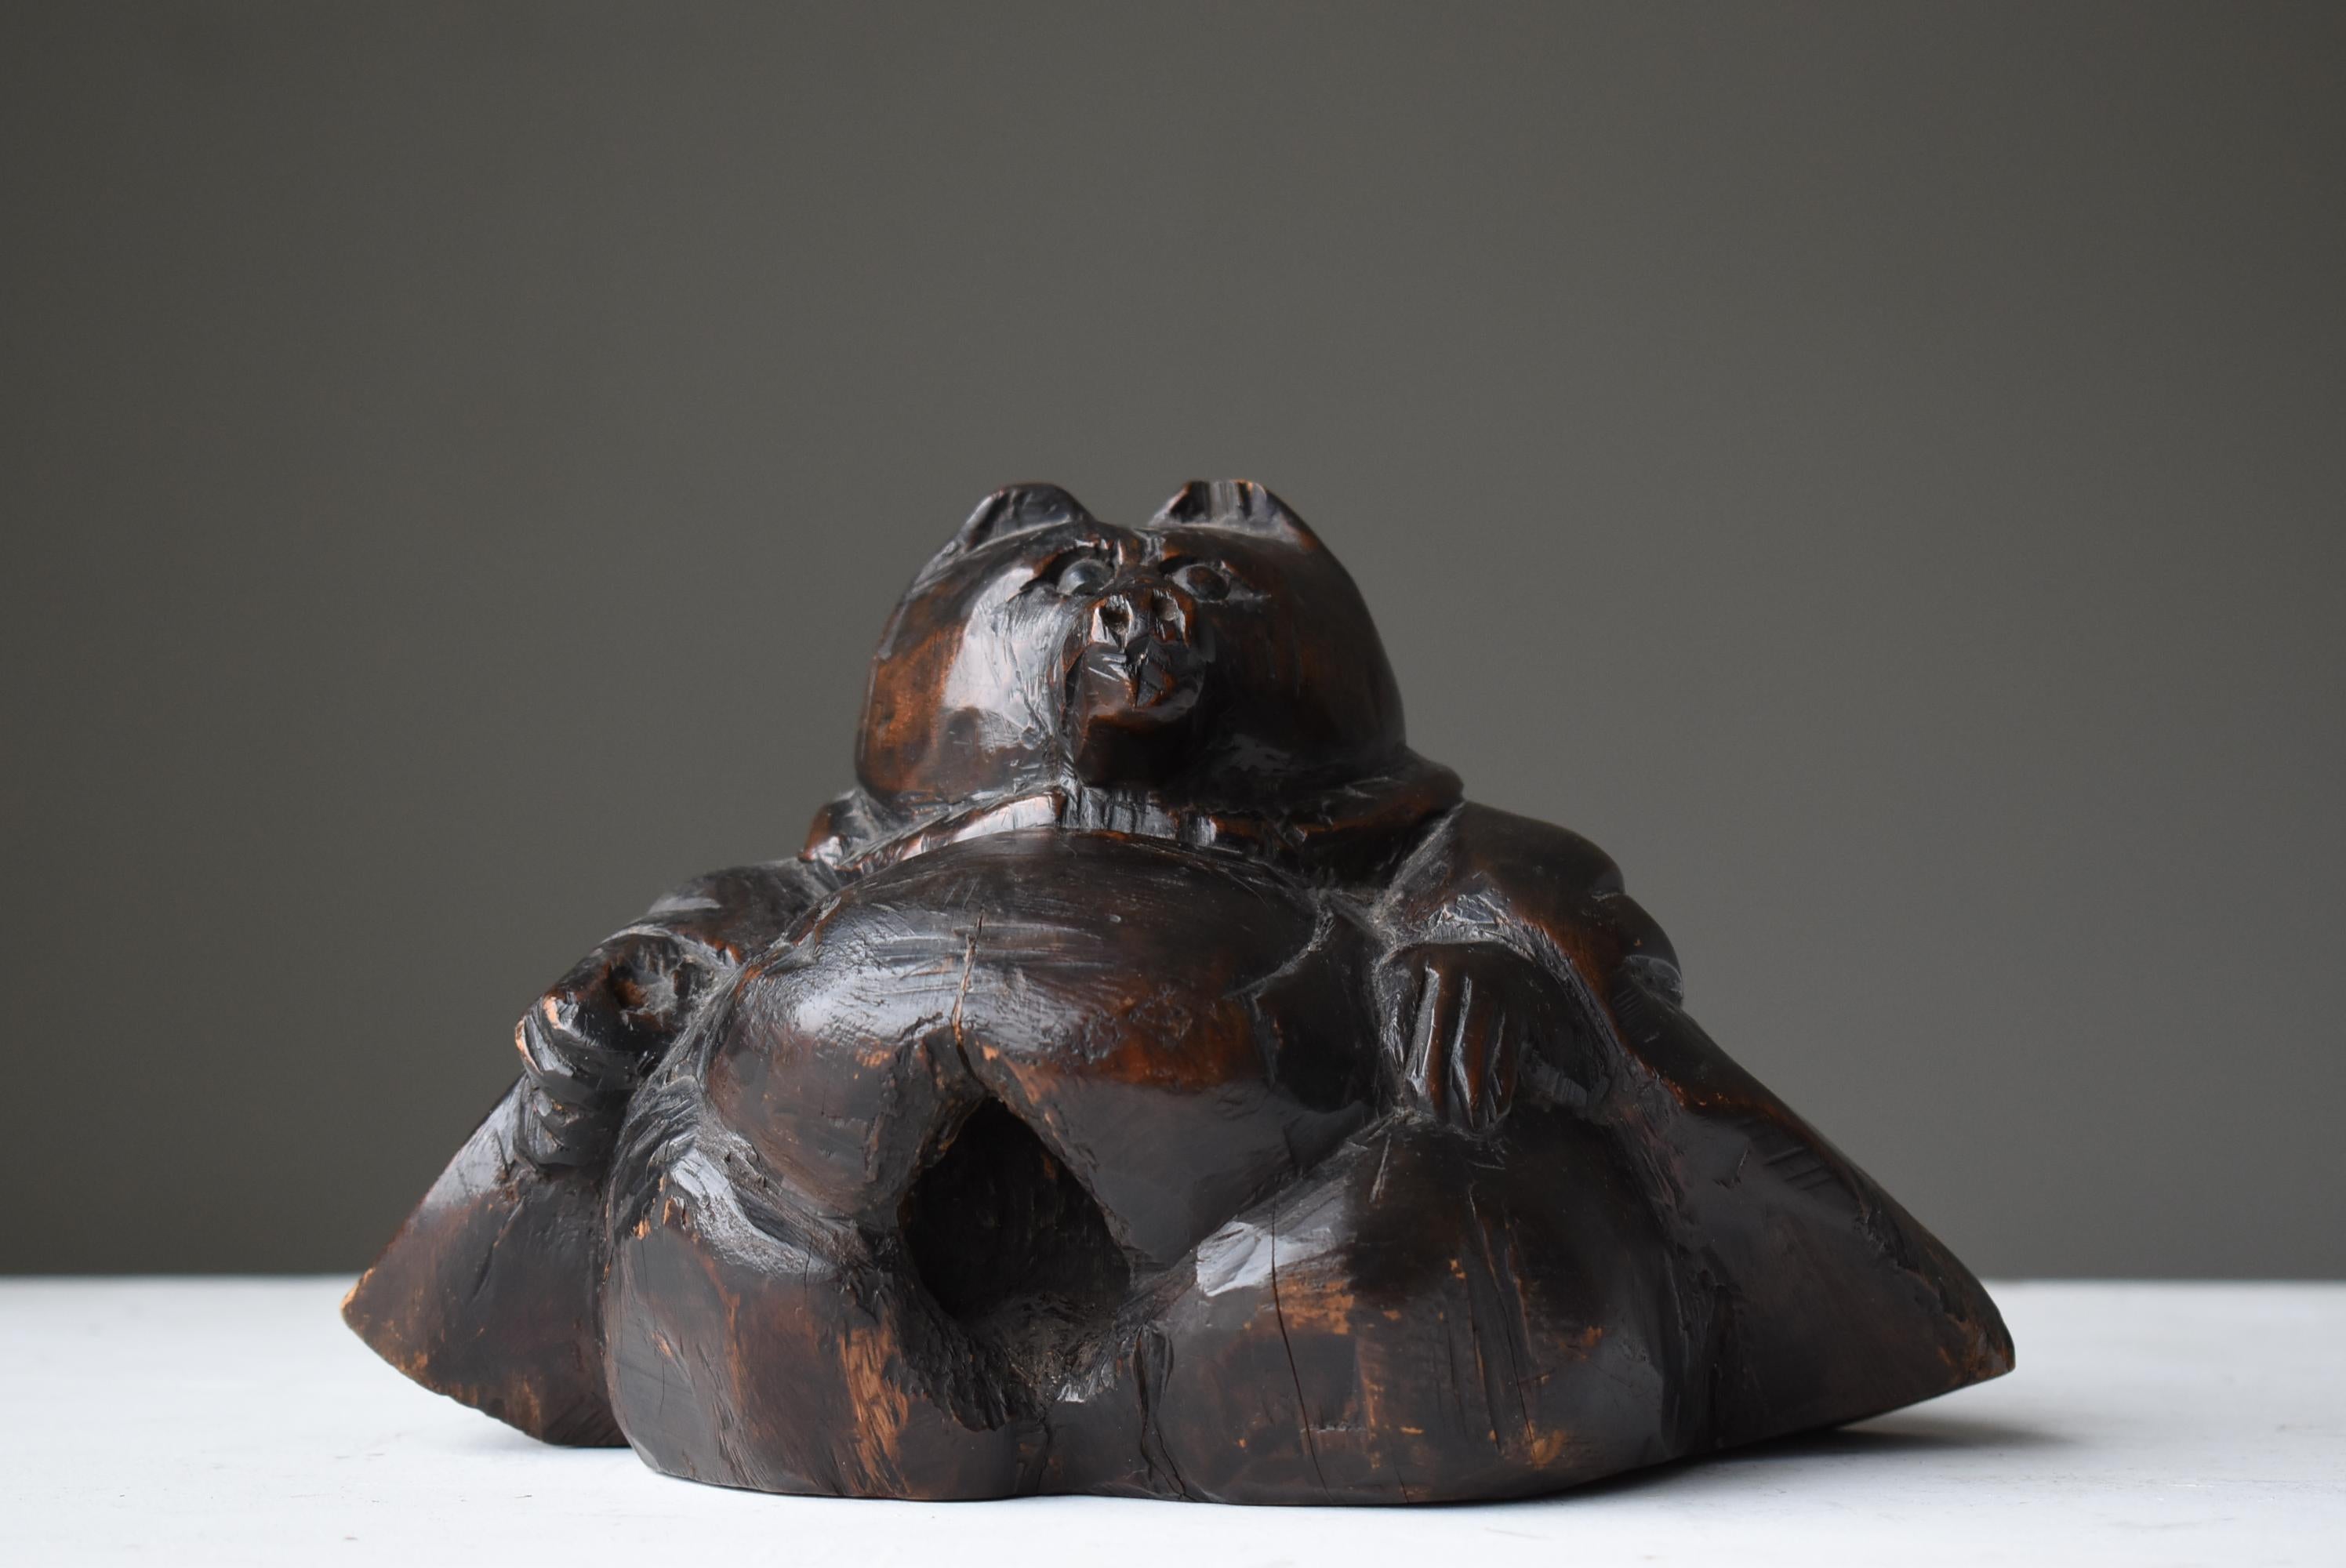 This is an old Japanese wooden carving of a raccoon dog.
This is a very rare item in the form of a monk.
It is believed to be from the Meiji period (1860s-1920s).
It is an Itto-bori carving.

It is assumed that the raccoon was made to serve as